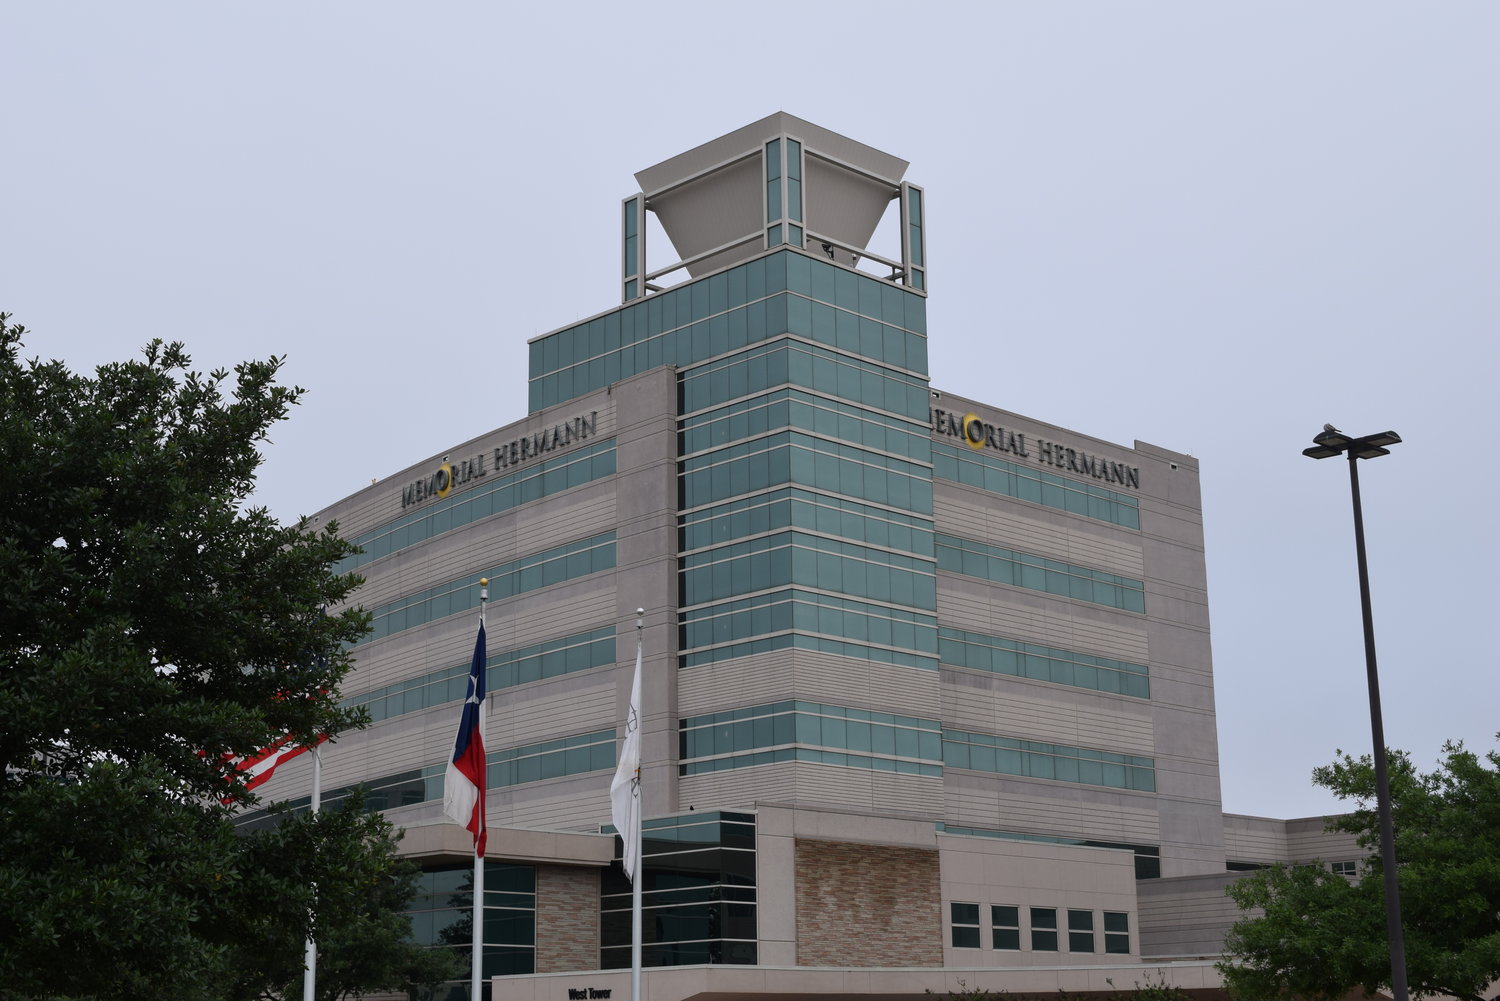 Hospitals across the state have seen a surge in COVID-19 cases coming into their emergency rooms as the Delta variant of the virus spreads quickly. Medical officials in hospital systems and in state and county governments are encouraging Texans to get vaccinated and resume wearing masks.